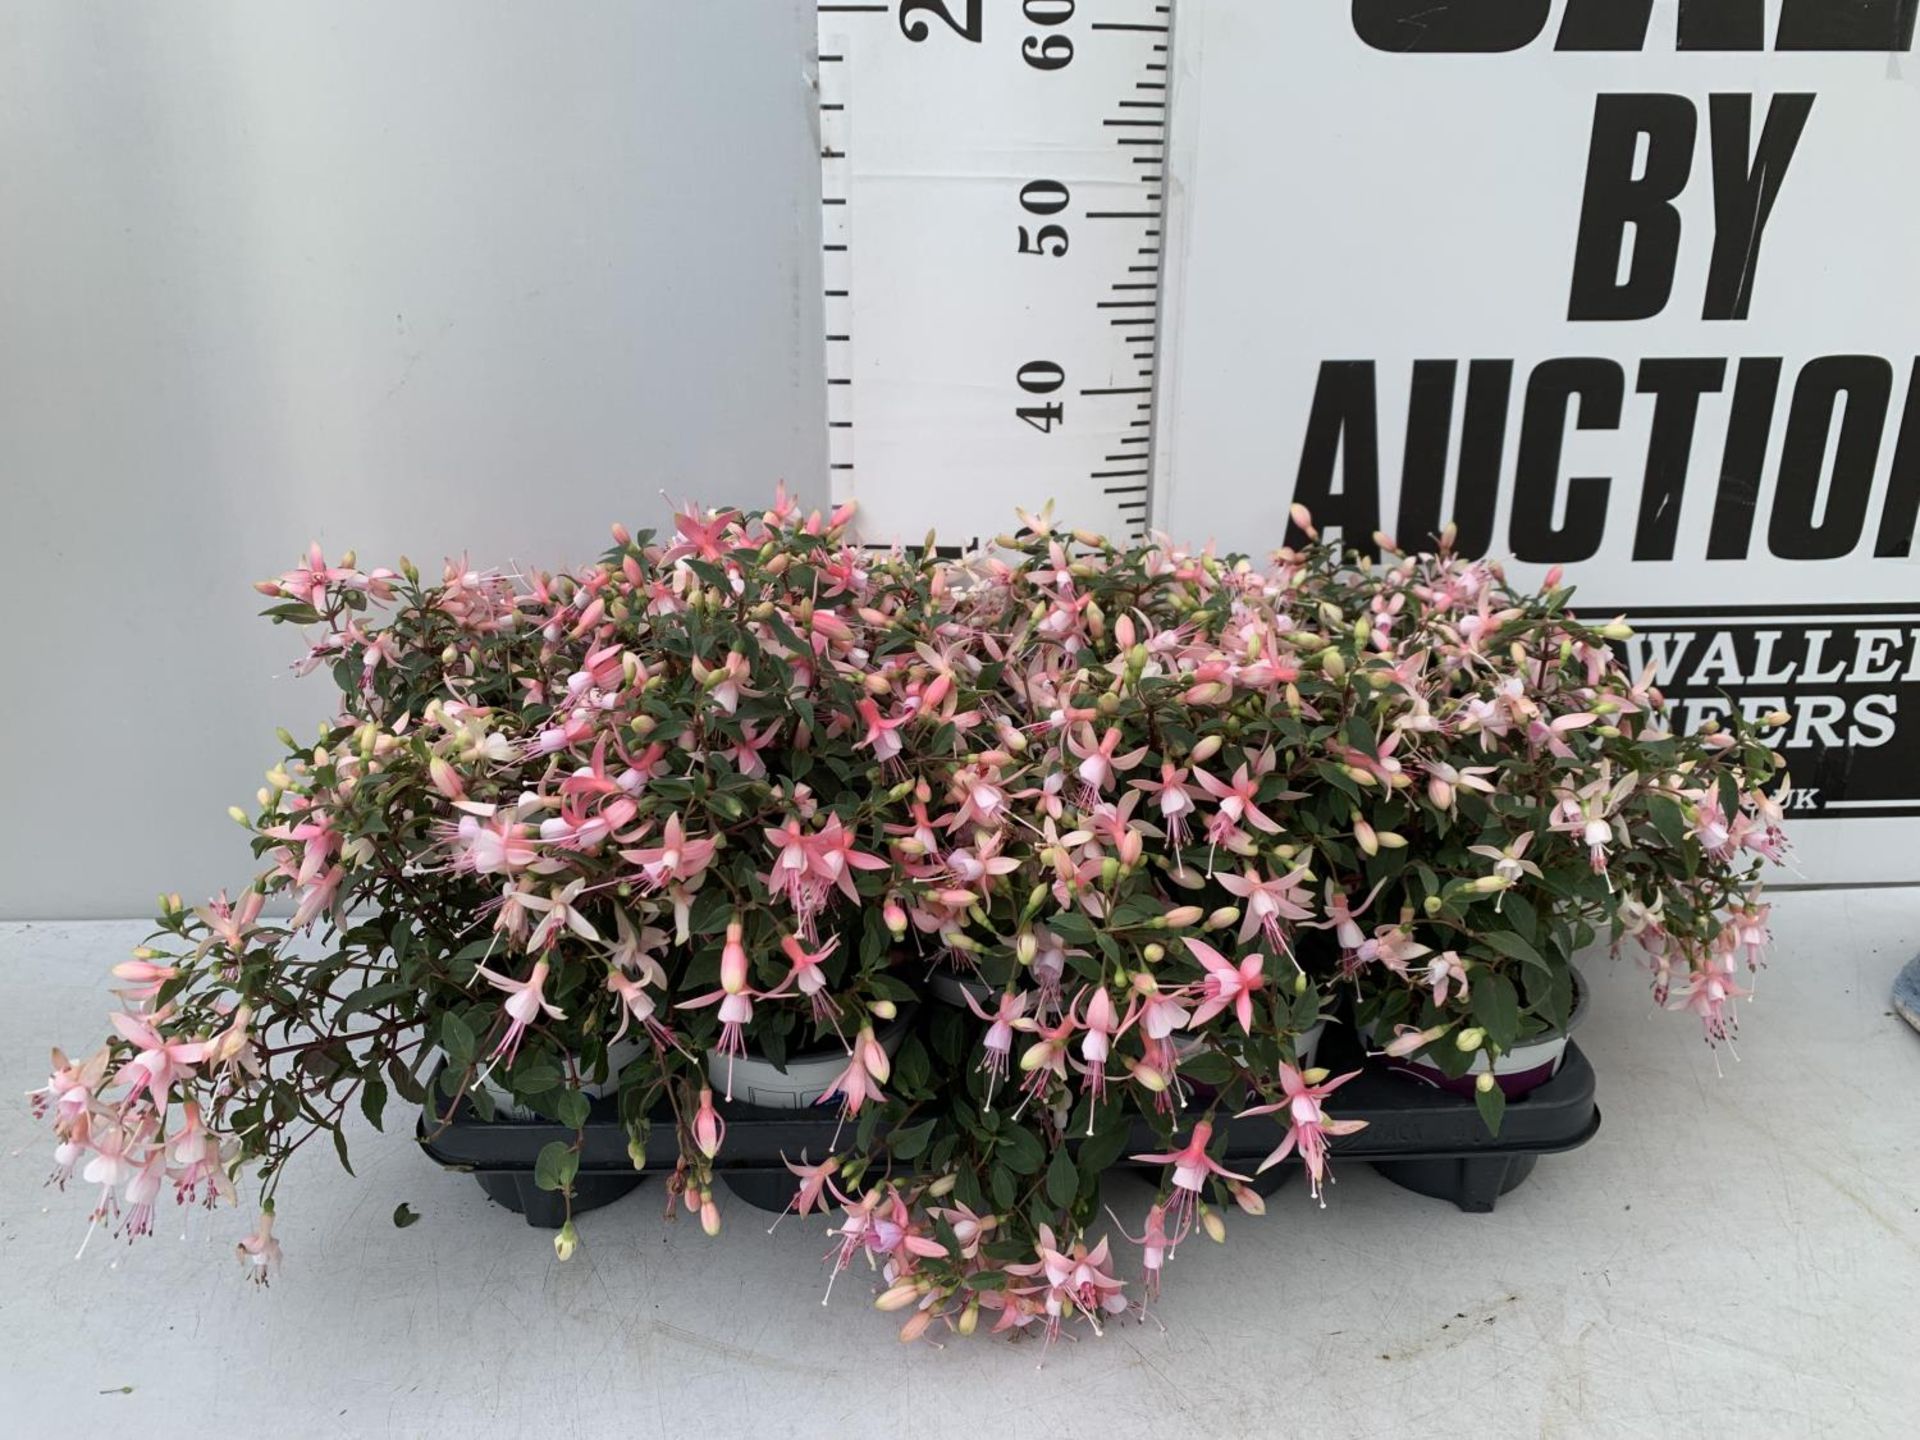 NINE FUCHSIA BELLA IN 20CM POTS 20-30CM TALL TO BE SOLD FOR THE NINE PLUS VAT